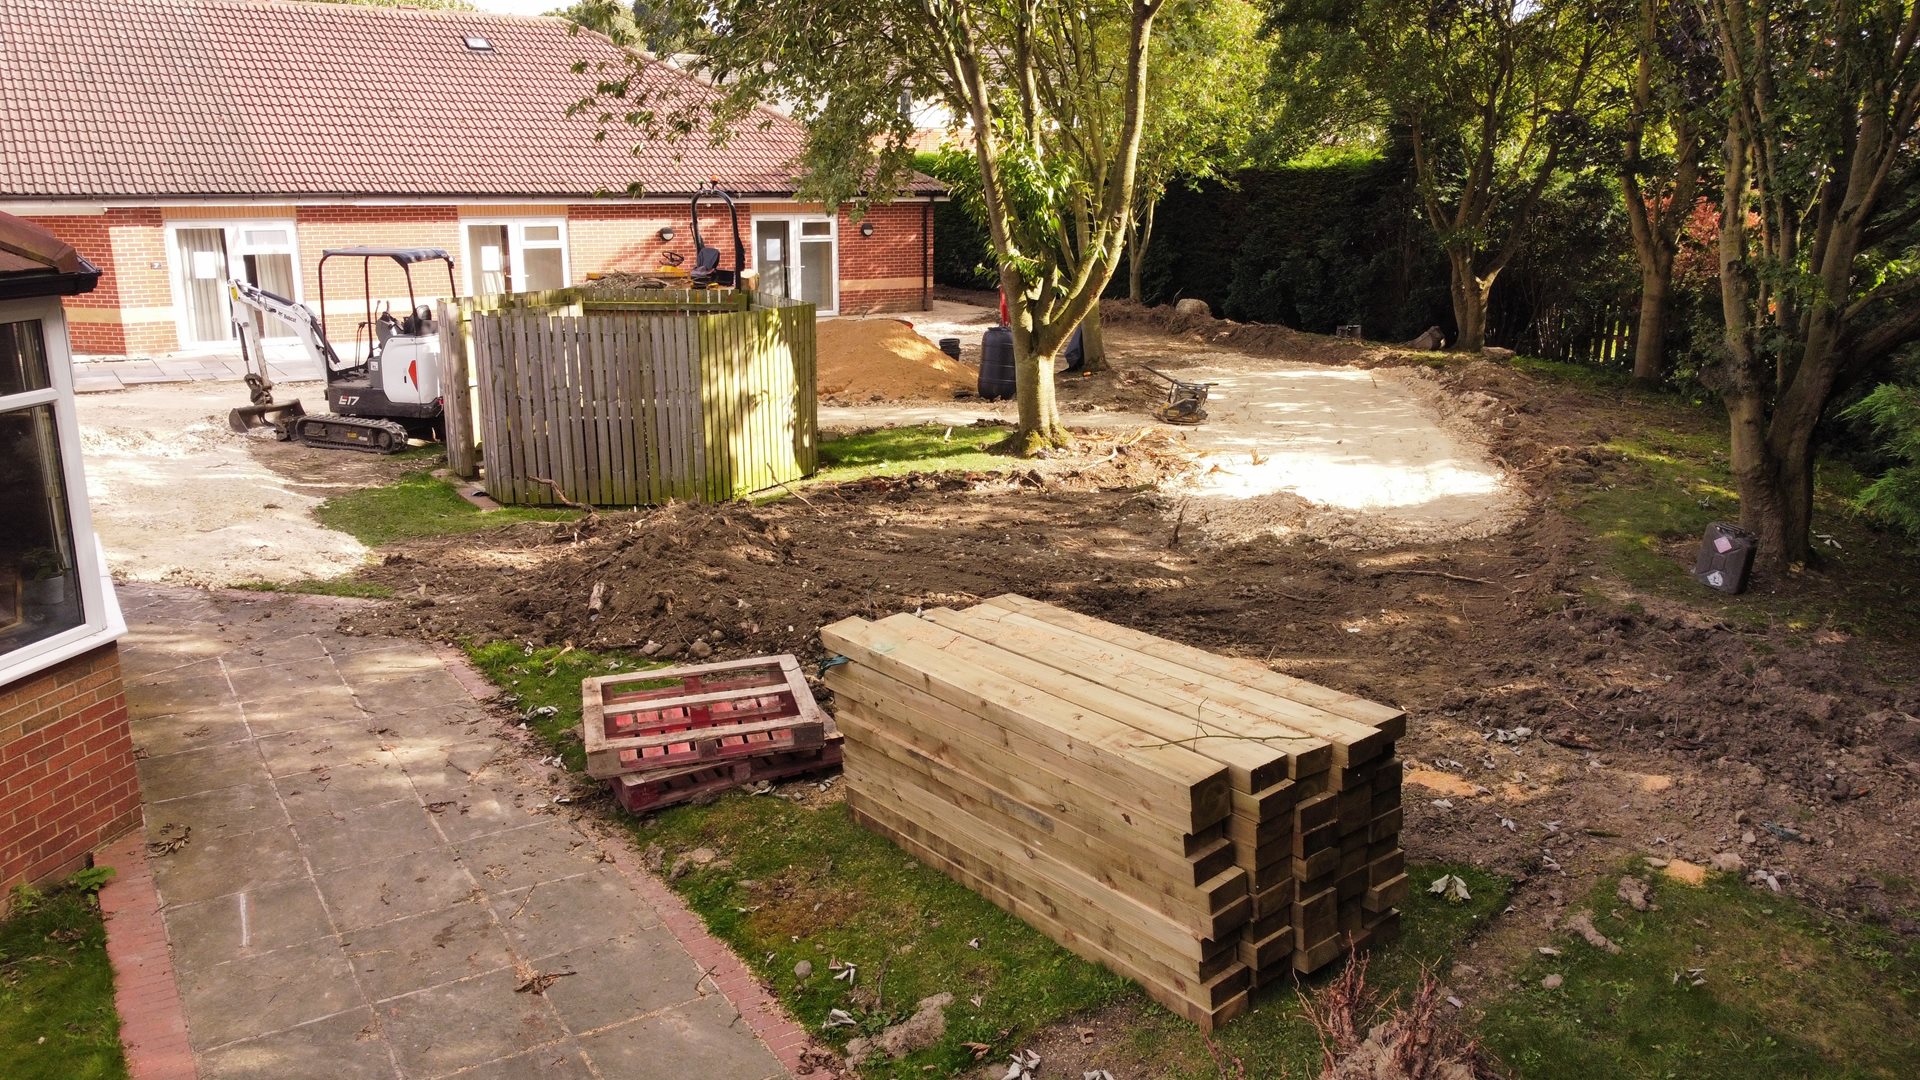 Before phase 1 of the garden project